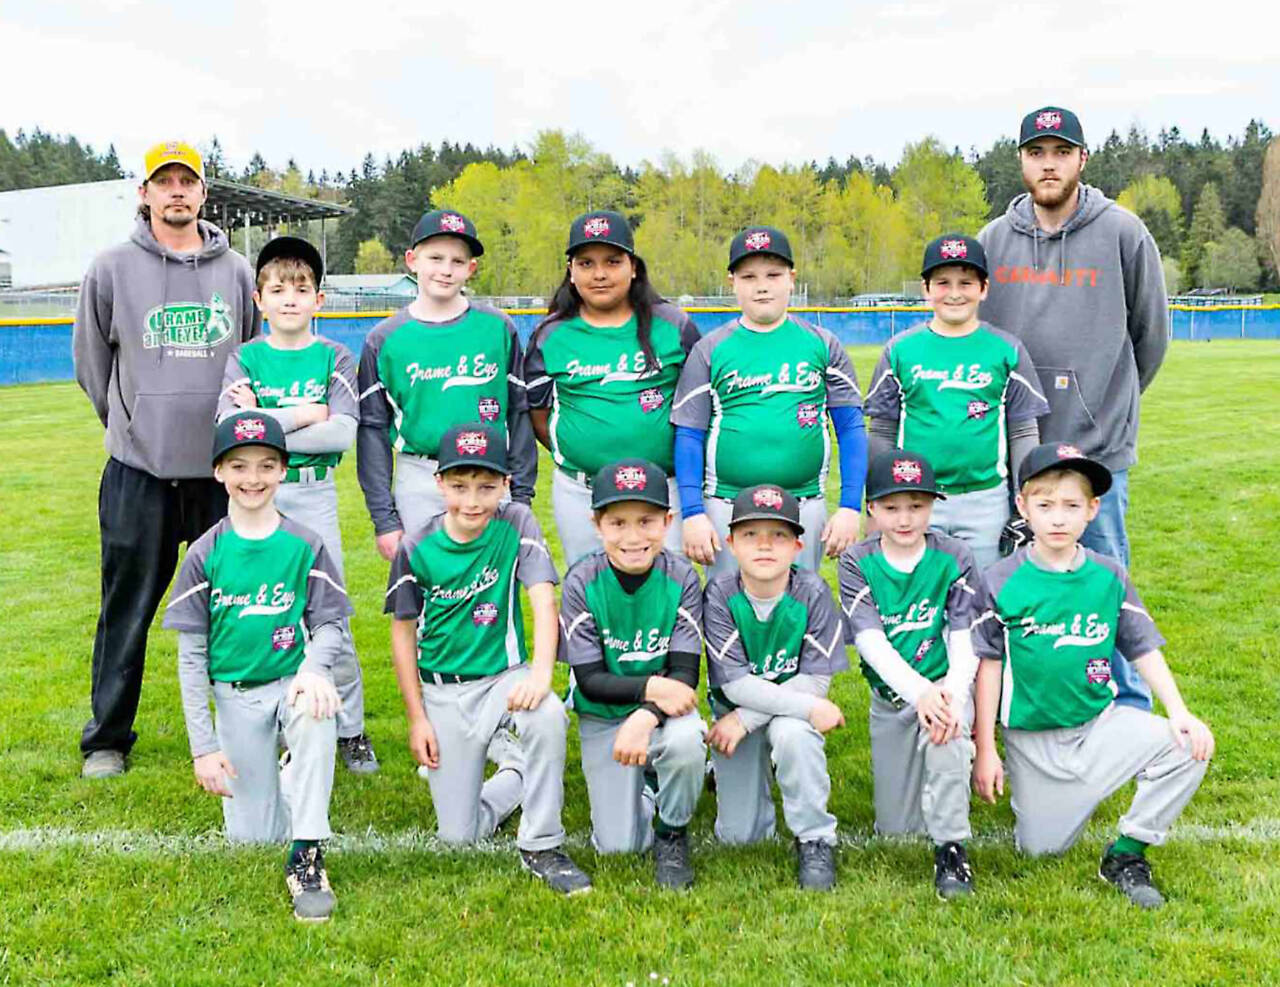 Frame & Eye were the champions of the Triple AAA tournament at the Port Angeles city championships this past weekend. From left, front row, are Daemon Kilmer, Brody Romero, Jacob Potter, Levi Palmer, Bently Mock and Brayden Diltz. From left, back row, are coach Ryan Sage, Robbie Palmer, Revein Kendall, Eaglevalley Zuniga, Kameron Palmer, William Campbell and coach Austin Sage. (Courtesy photo)